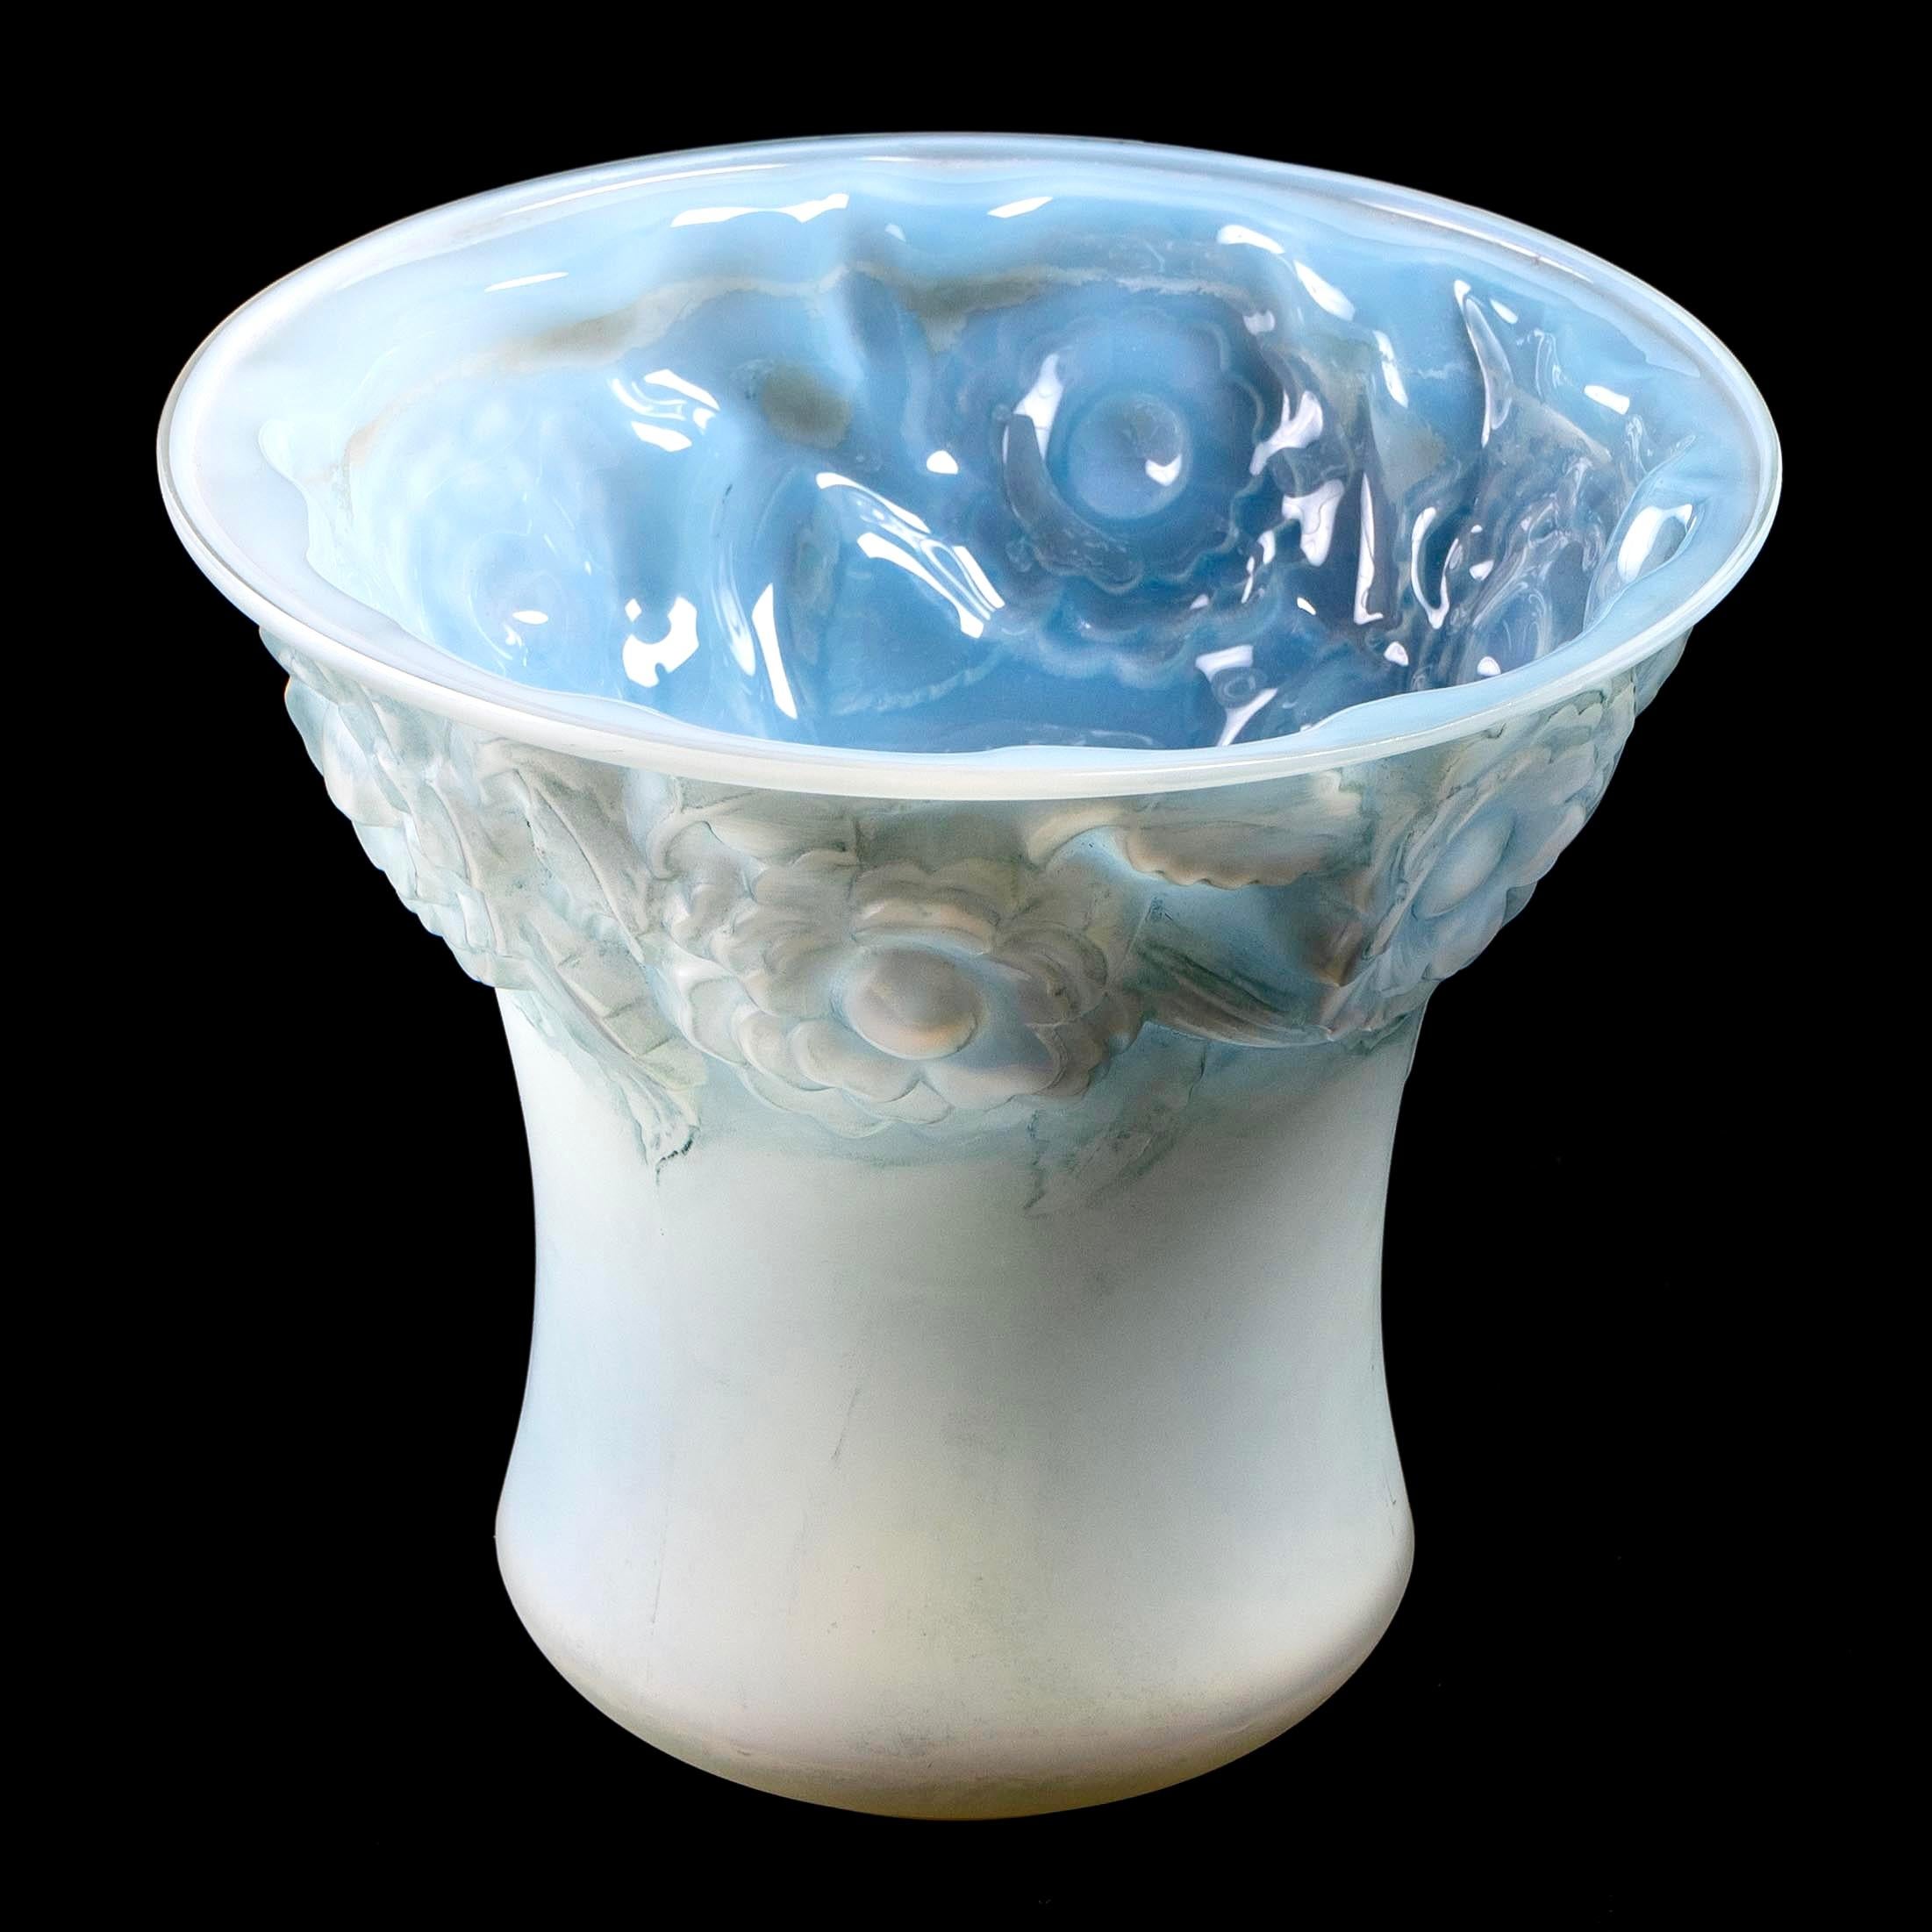 Art Deco 1930 René Lalique Orleans Vase in Double Cased Opalescent Glass with Blue Patina